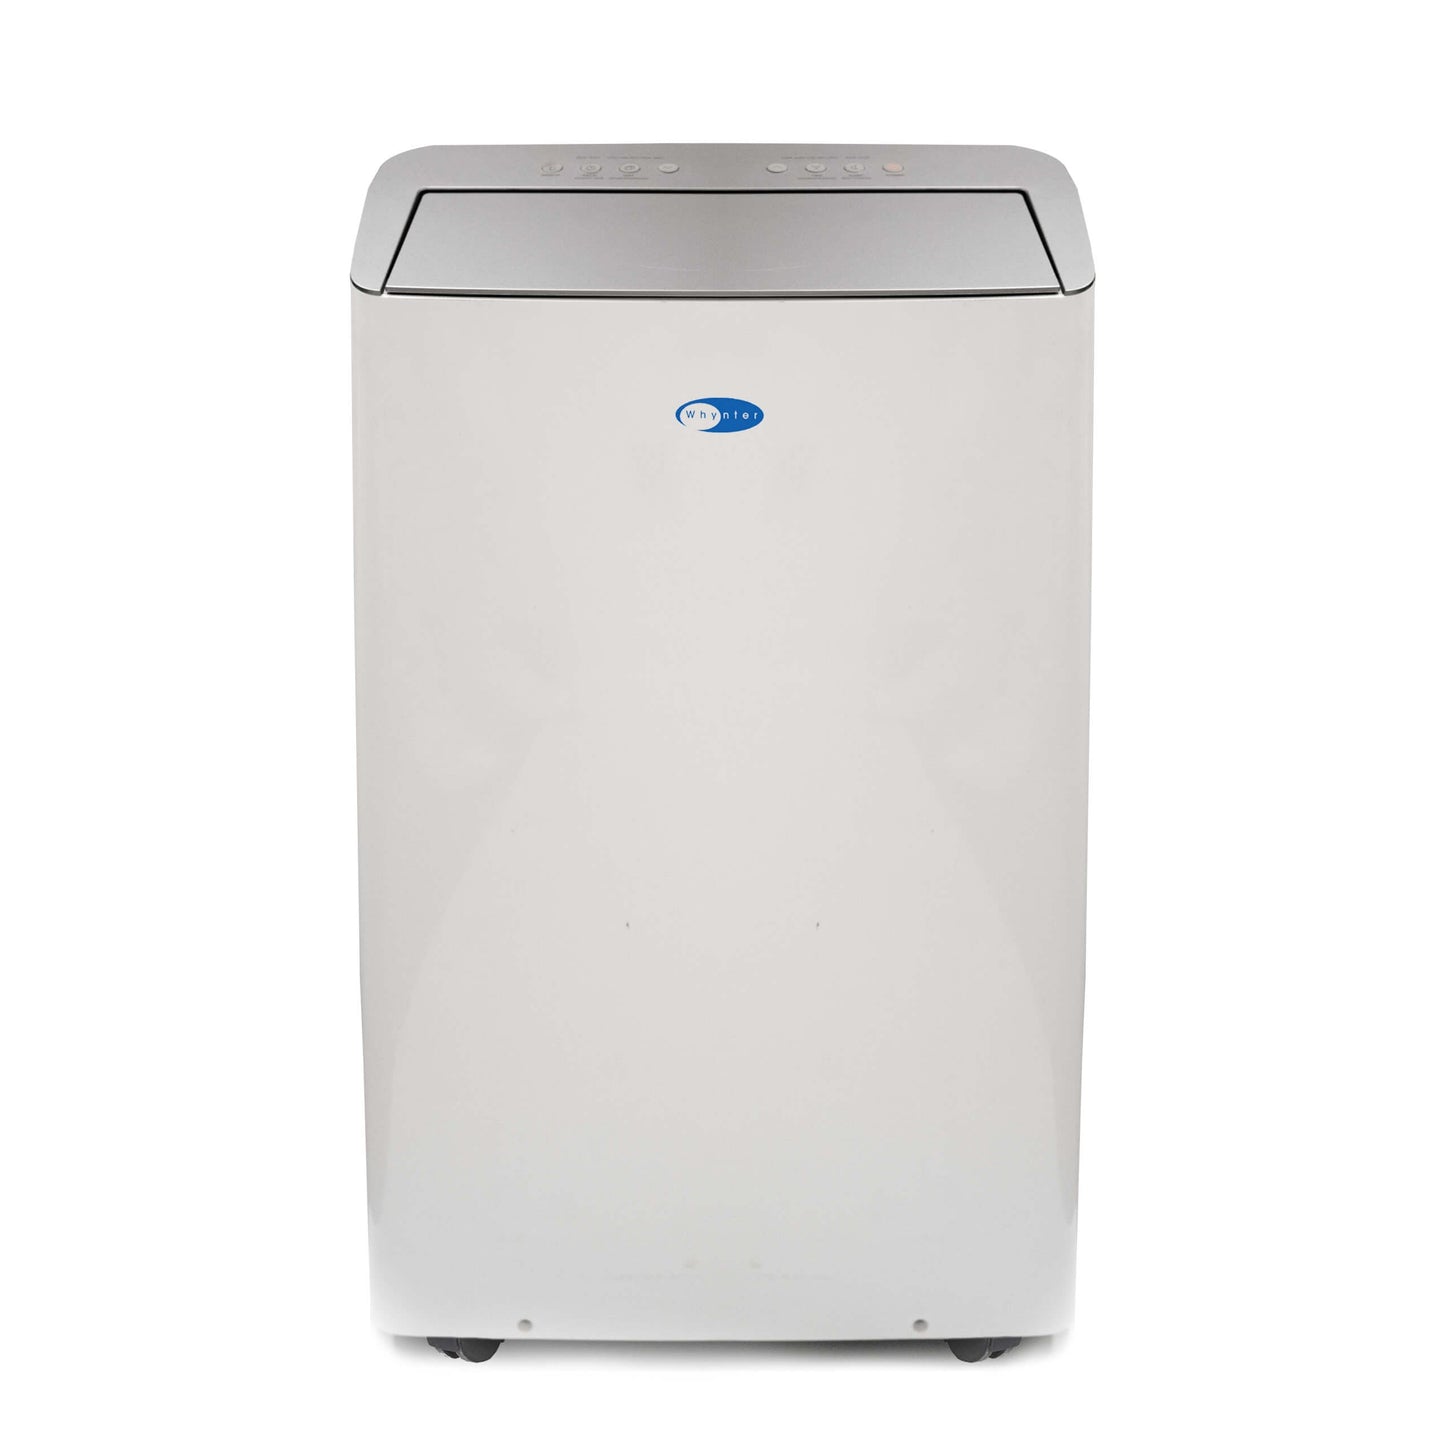 Whynter Air Conditioners Whynter ARC-1230WN 14,000 BTU (12,000 BTU SACC) NEX Inverter Dual Hose Cooling Portable Air Conditioner, Dehumidifier, and Fan with Smart Wi-Fi, up to 600 sq ft in White